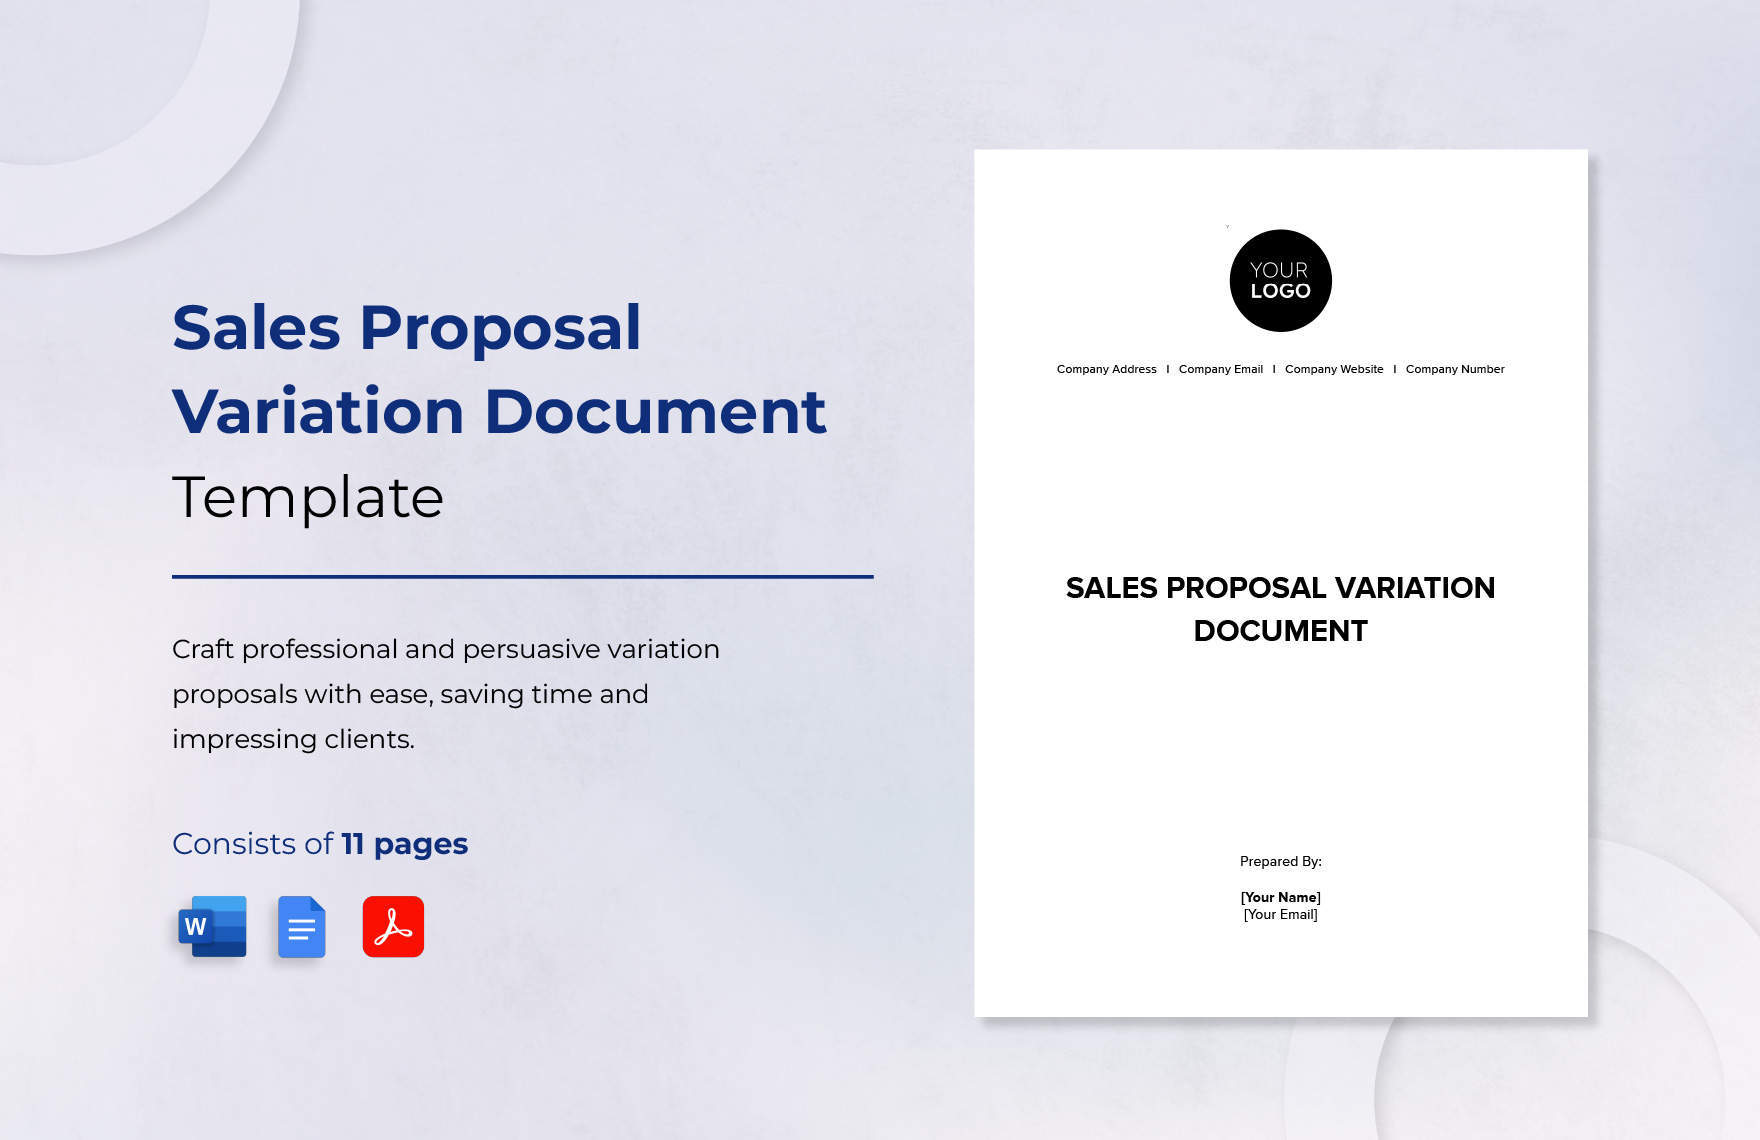 Sales Proposal Variation Document Template